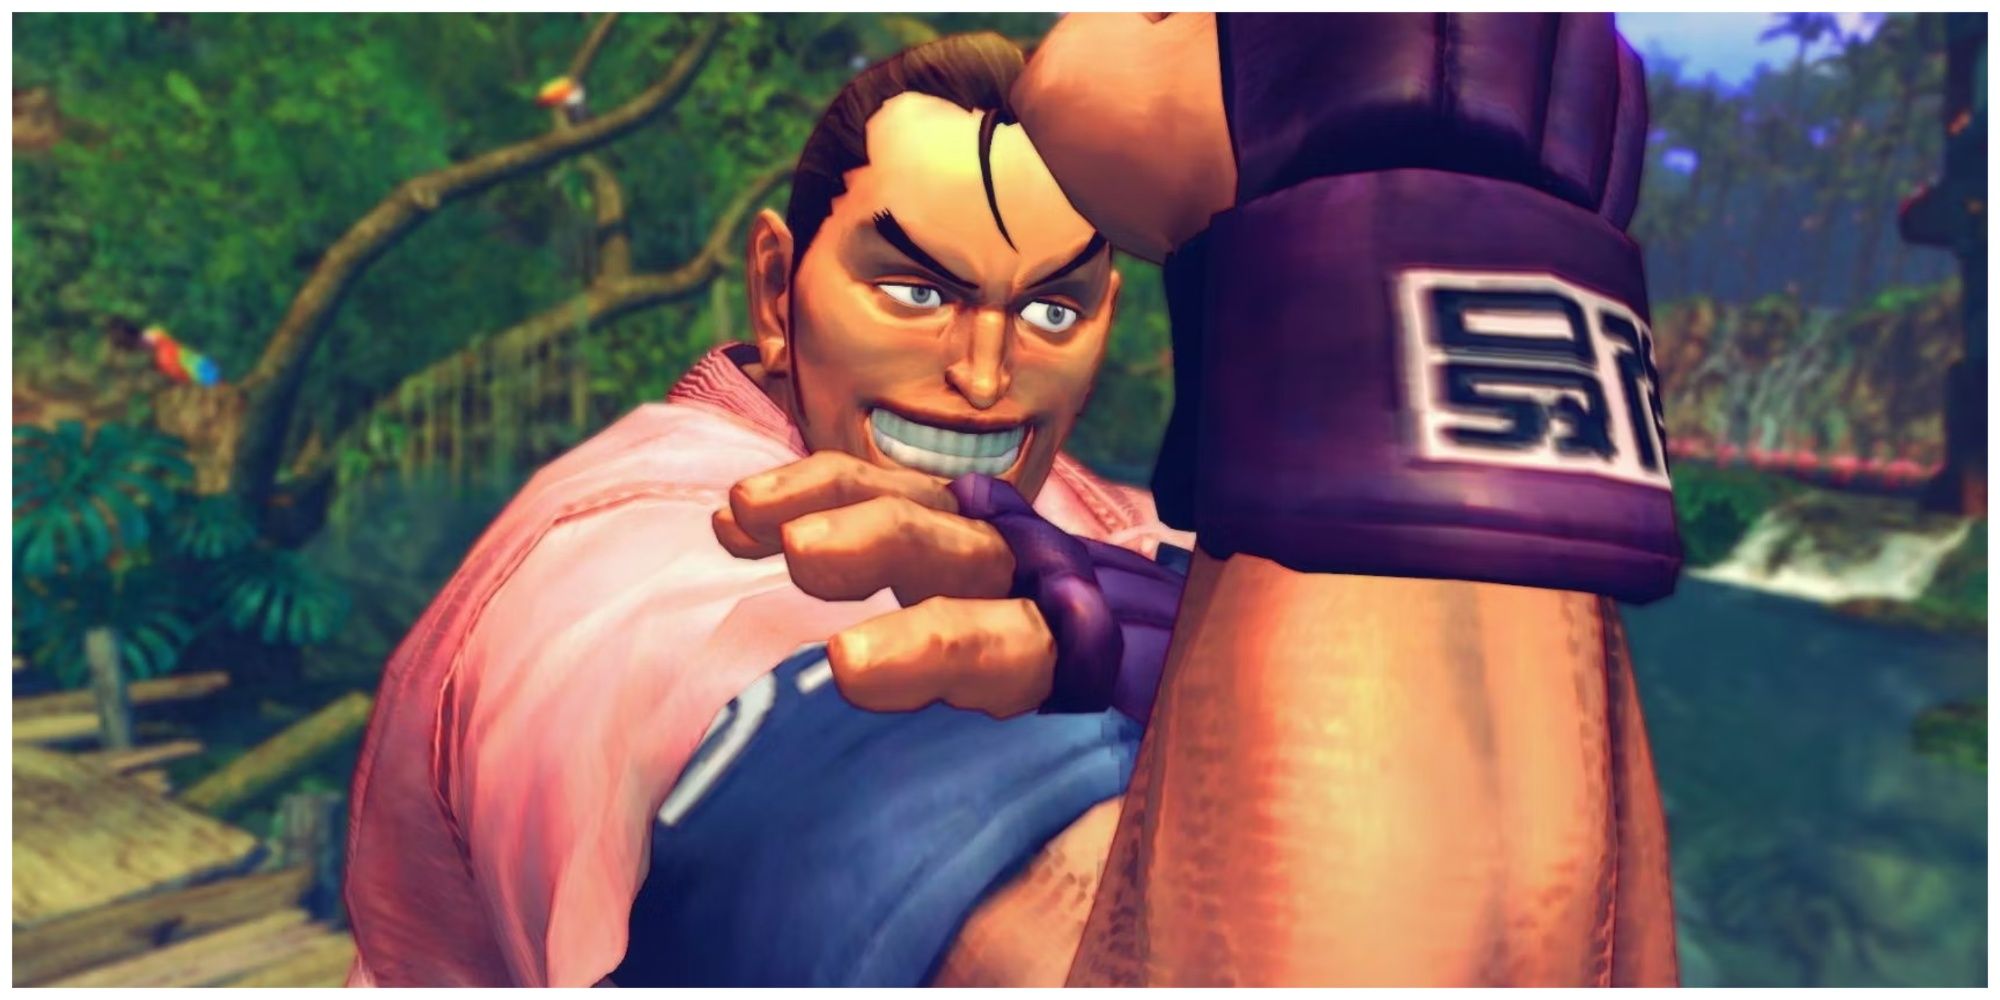 Dan Hibiki holding his arm to showcase his muscle in Street Fighter 4